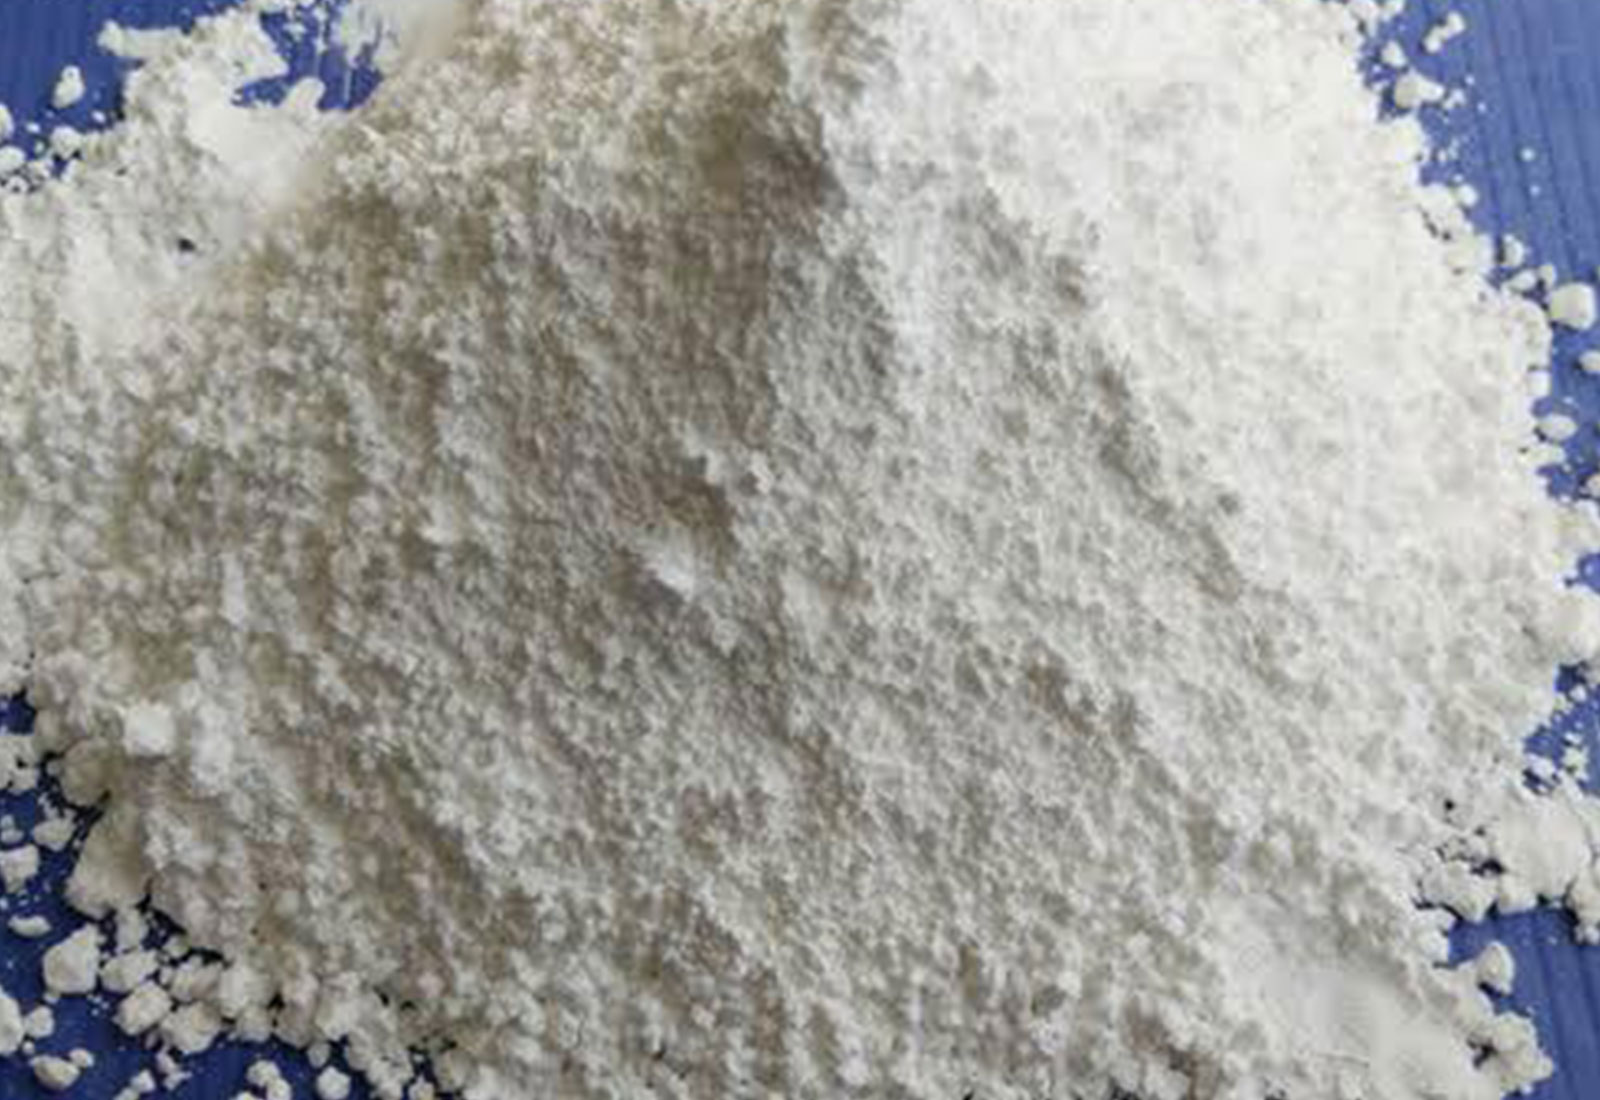 Oyster Shell Calcium Carbonate Powder | Caltron Clays